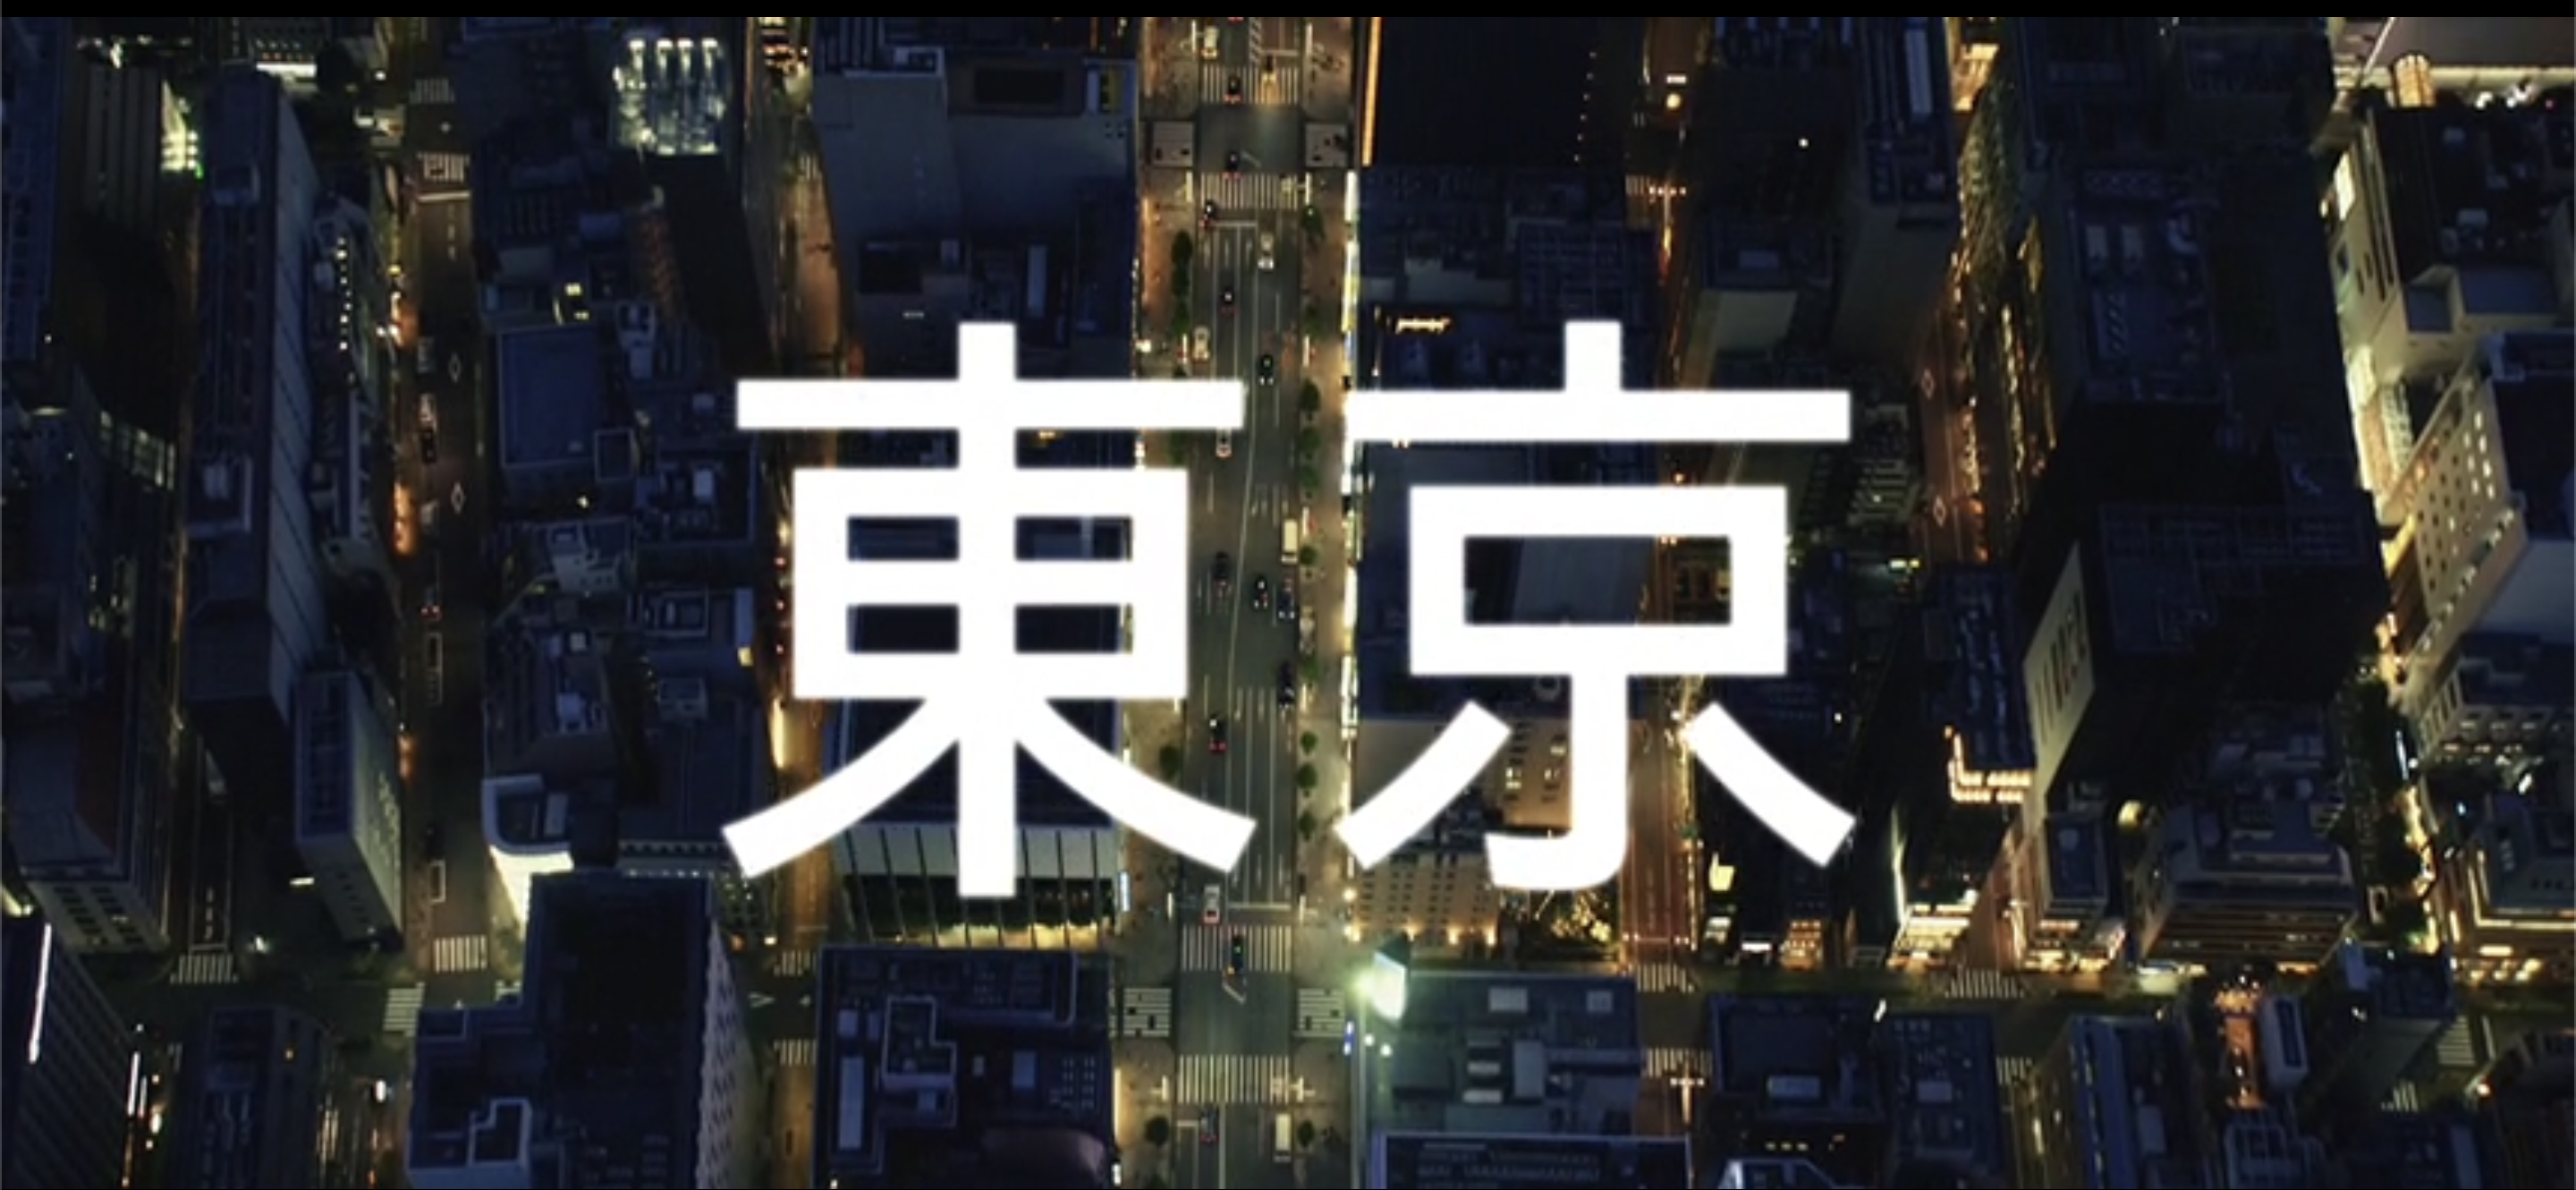 The drone shot accompanying the stylized typography spelling out "Tokyo." Image capture, Pachinko (2022).